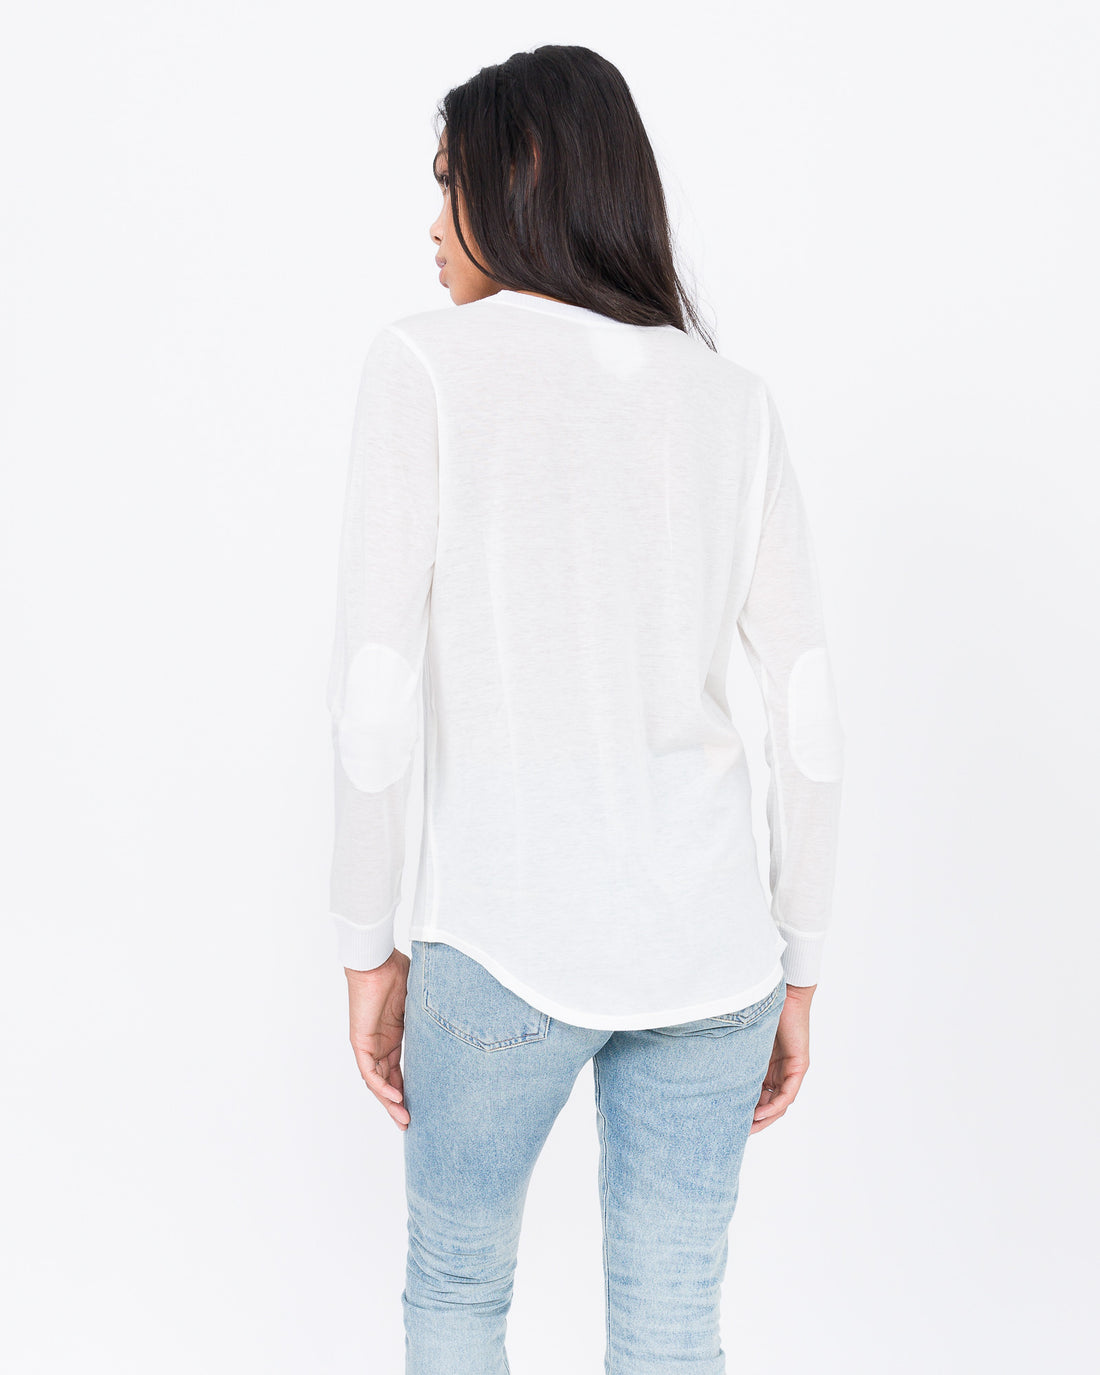 Lucille Knit Jersey with Cashmere Elbow Pads